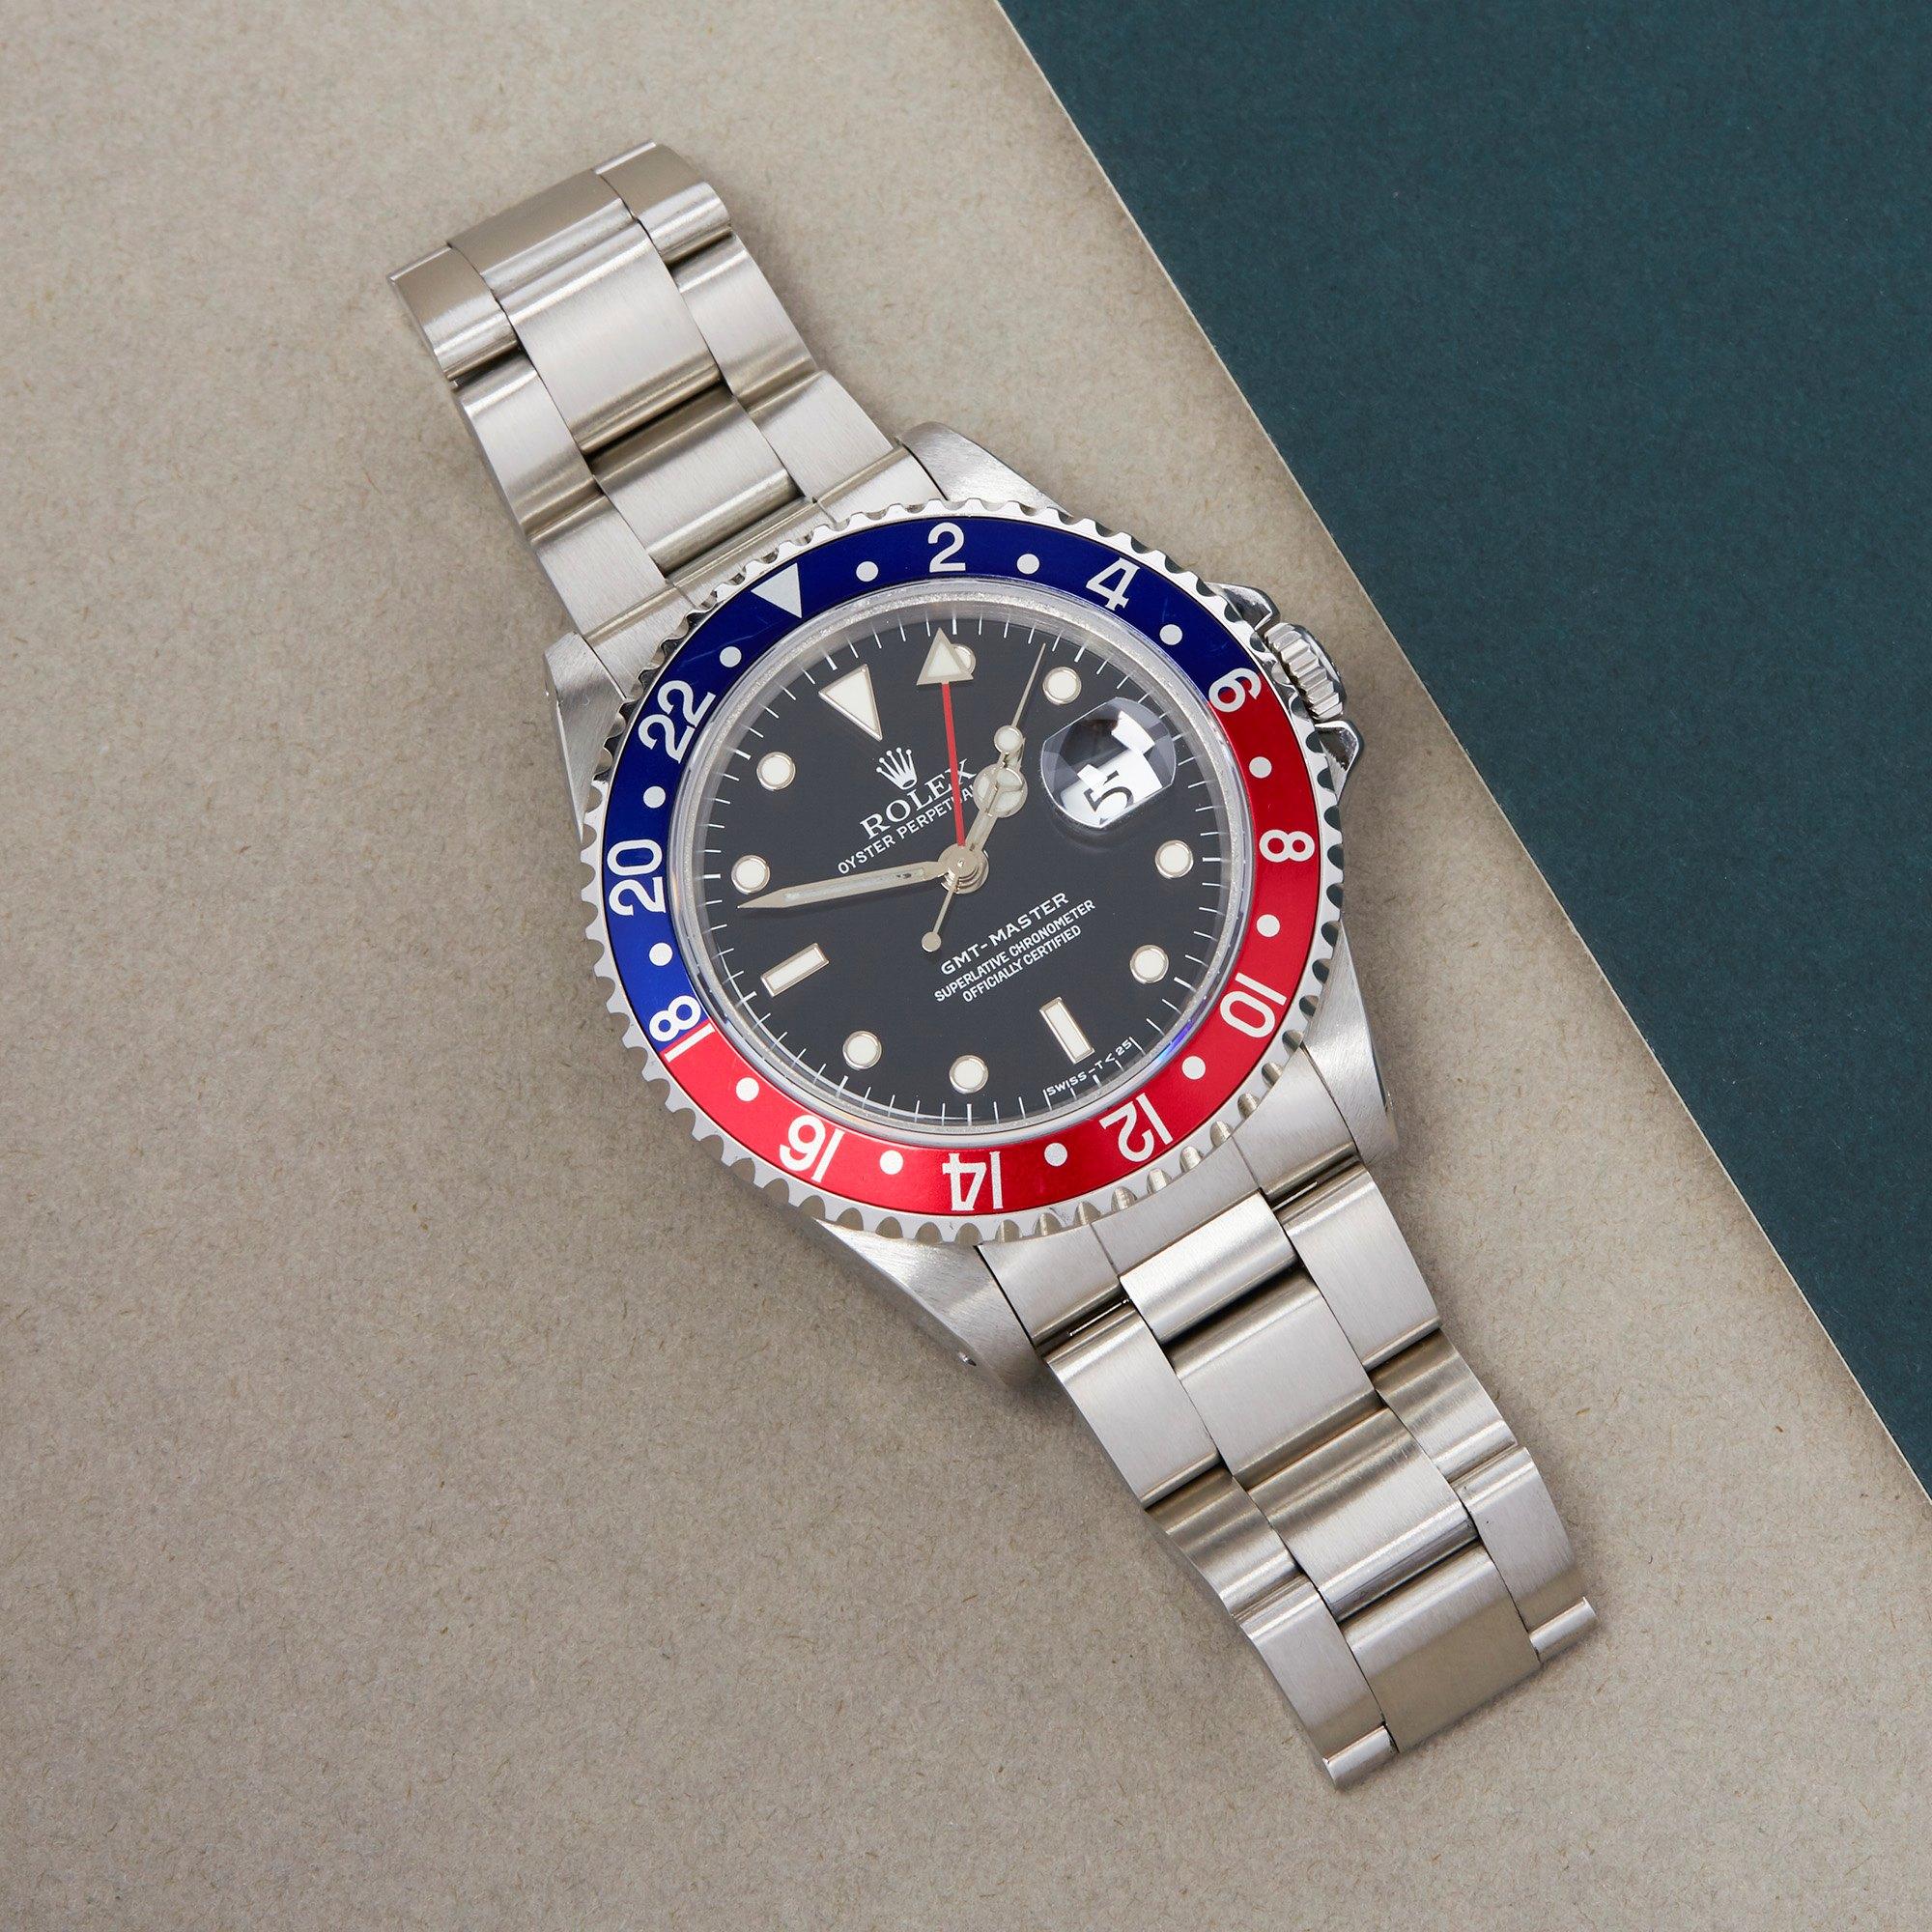 Xupes Reference: W007682
Manufacturer: Rolex
Model: GMT-Master
Model Variant: 0
Model Number: 16700
Age: 35126
Gender: Men
Complete With: Rolex Box, Manuals, Guarantee, Card Holder, Service Pouch  & Swing Tag
Dial: Black Other
Glass: Sapphire